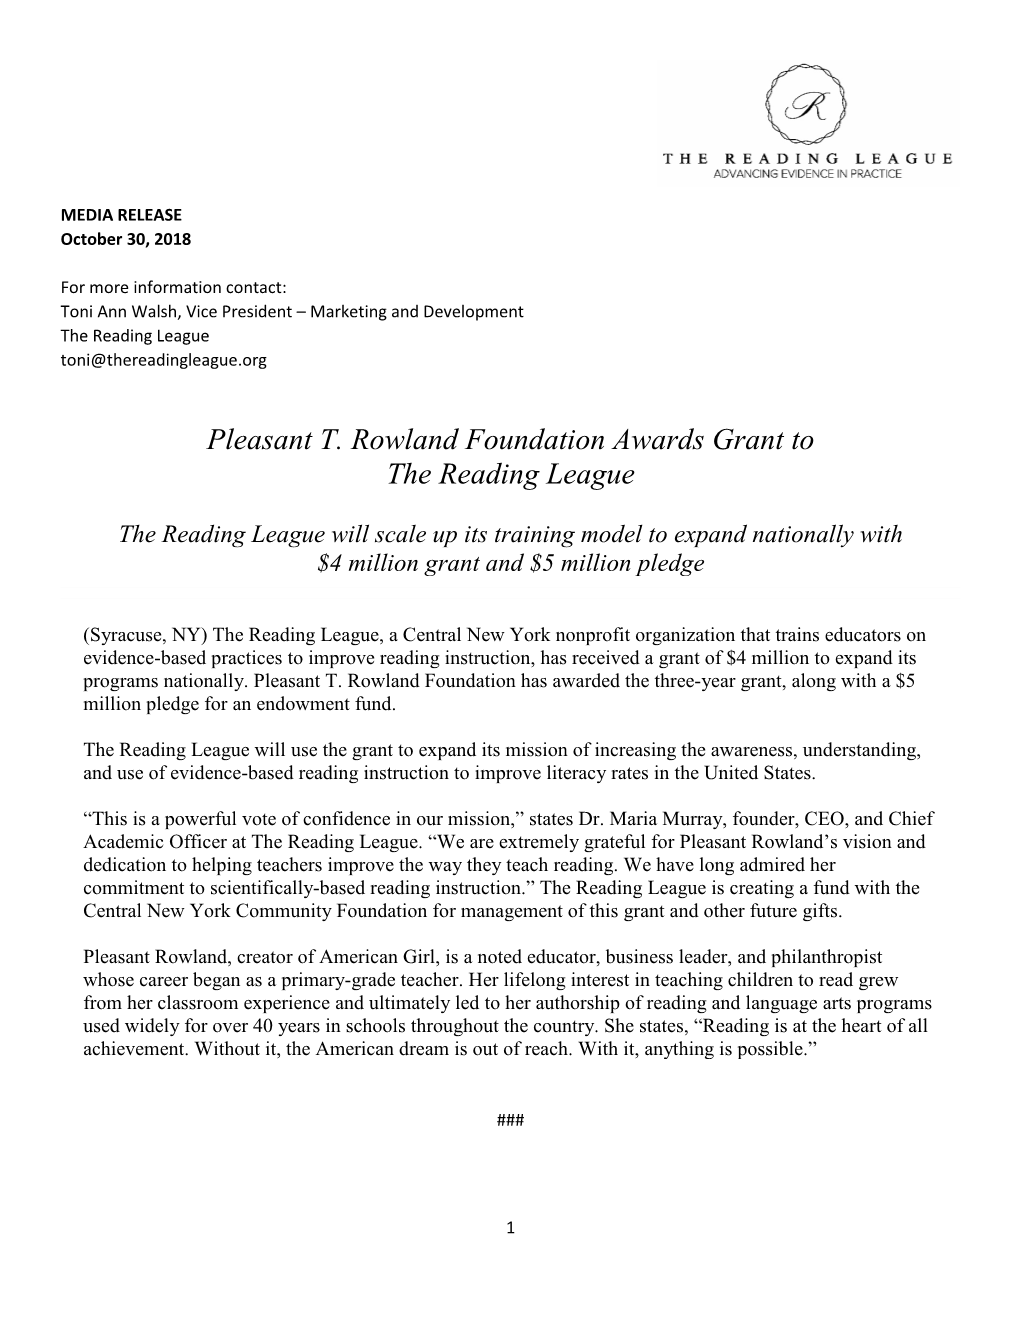 Pleasant T. Rowland Foundation Awards Grant to the Reading League